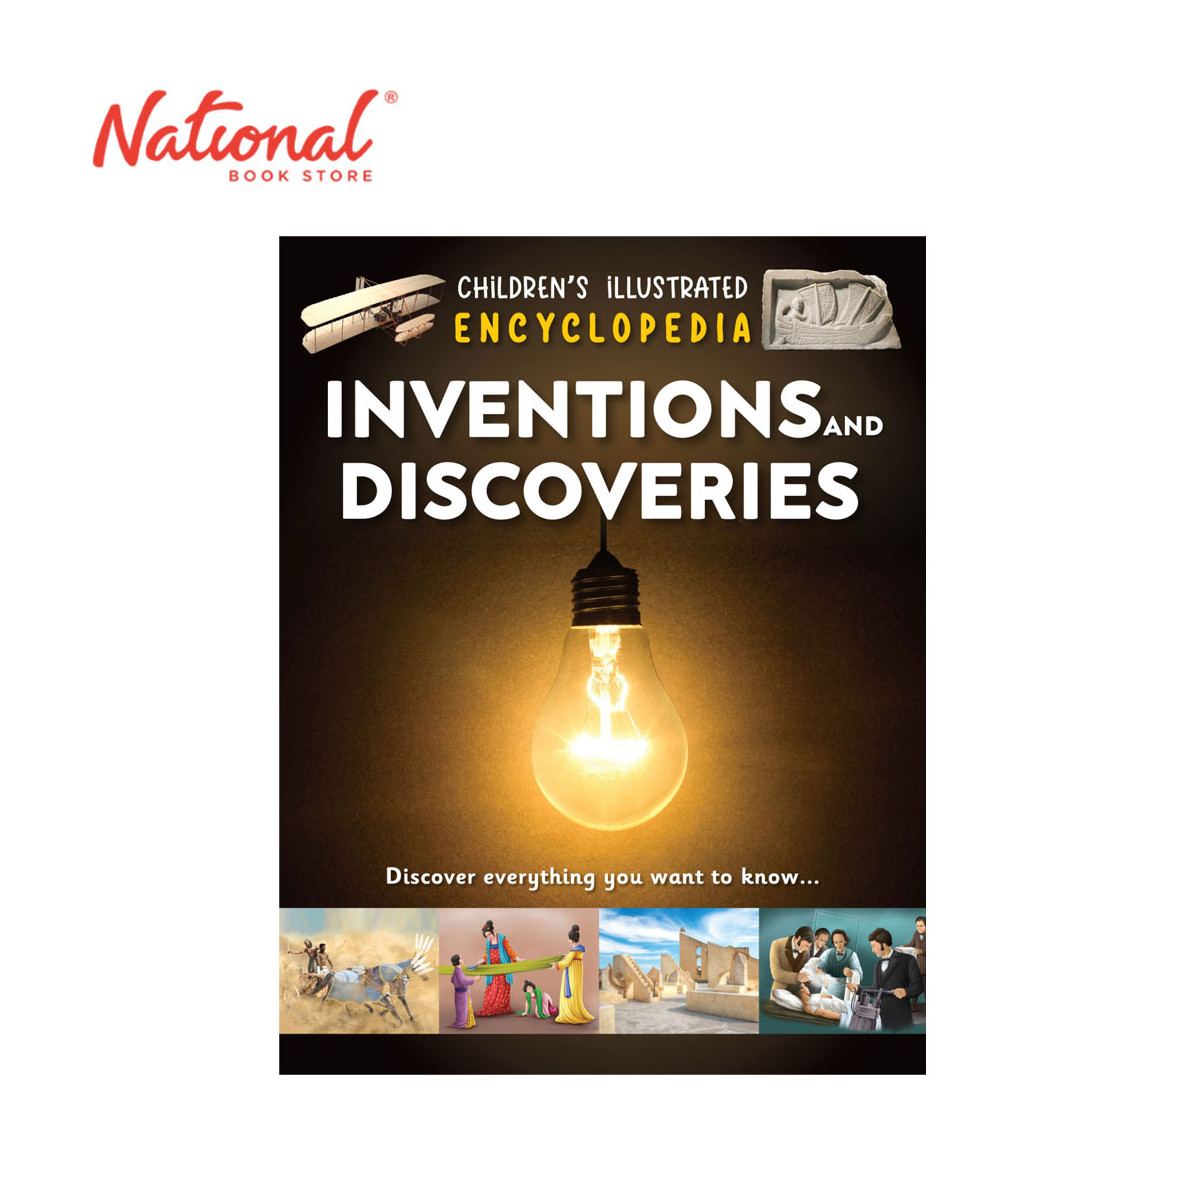 Children's Illustrated Encyclopedia: Inventions & Discoveries - Trade Paperback - Books for Kids